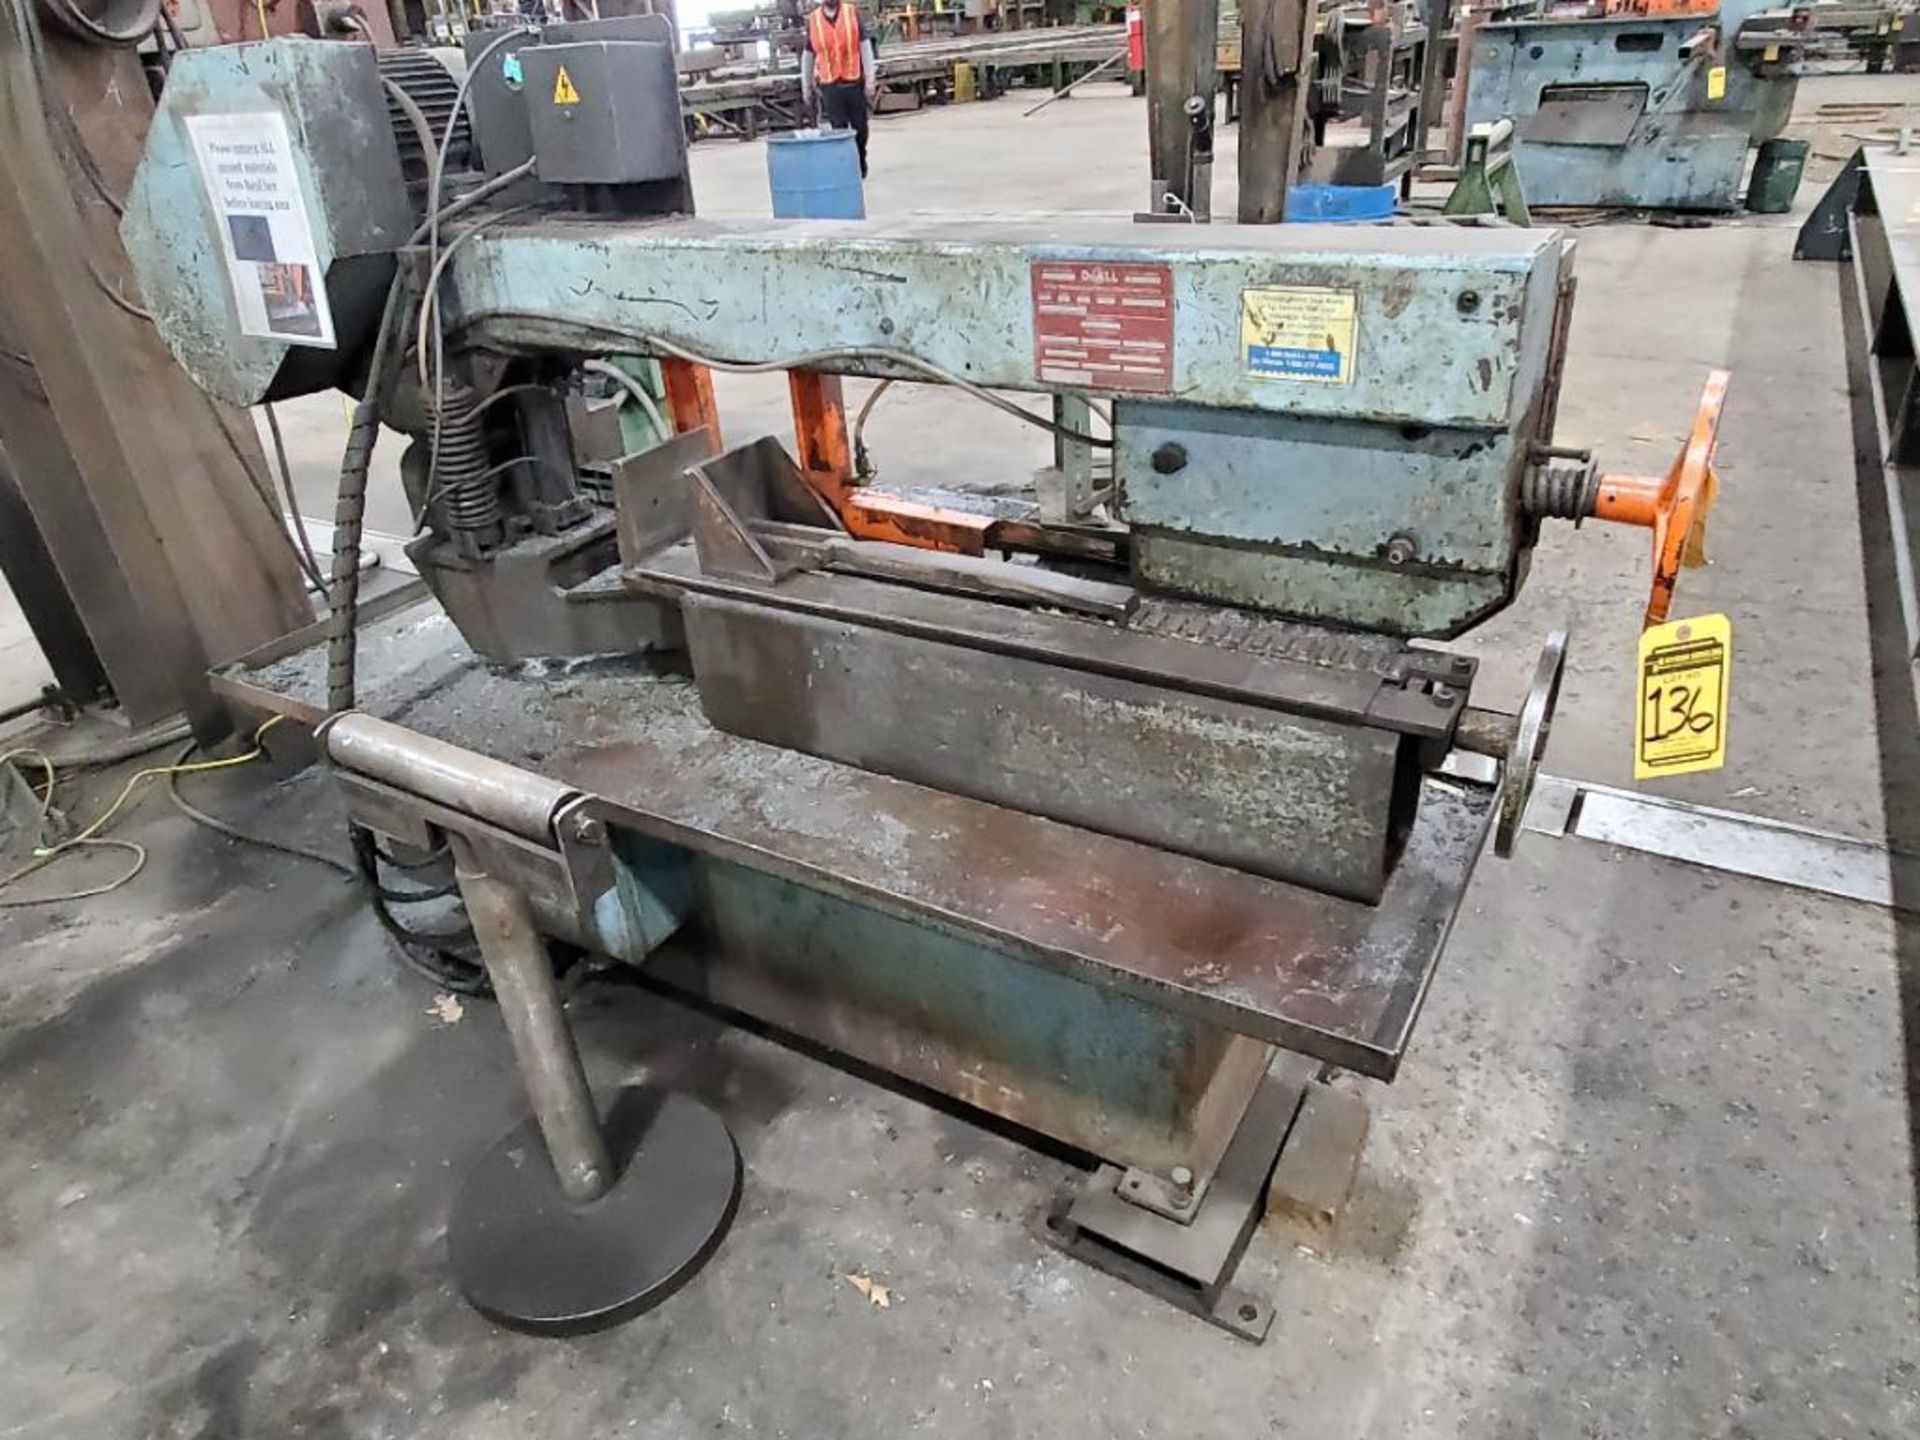 DOALL BANDSAW S; MO.C-916S SN.48 2-91227 230V 6.4AMPS 60HZ 3PHASE 159" BAND LENGTH - Image 2 of 8